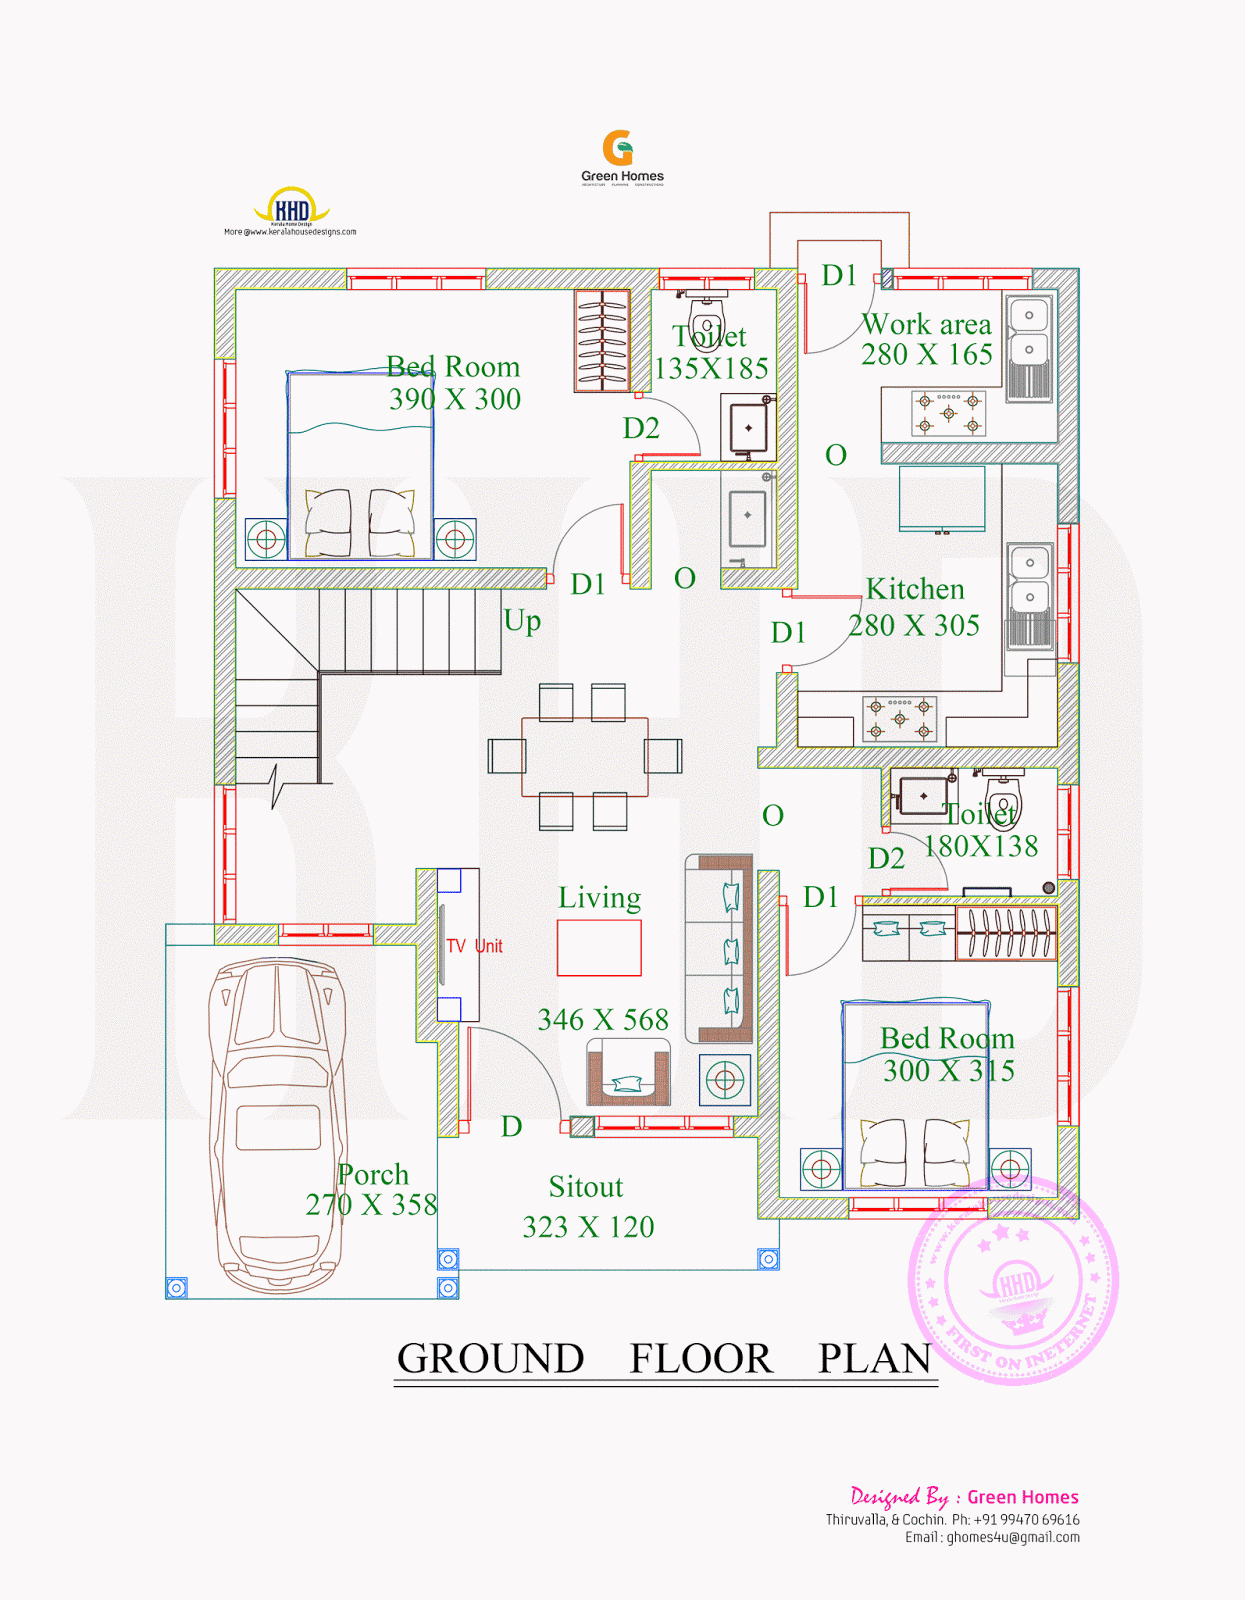 4BHK floor plan and elevation in 5 cent - Kerala home design and floor